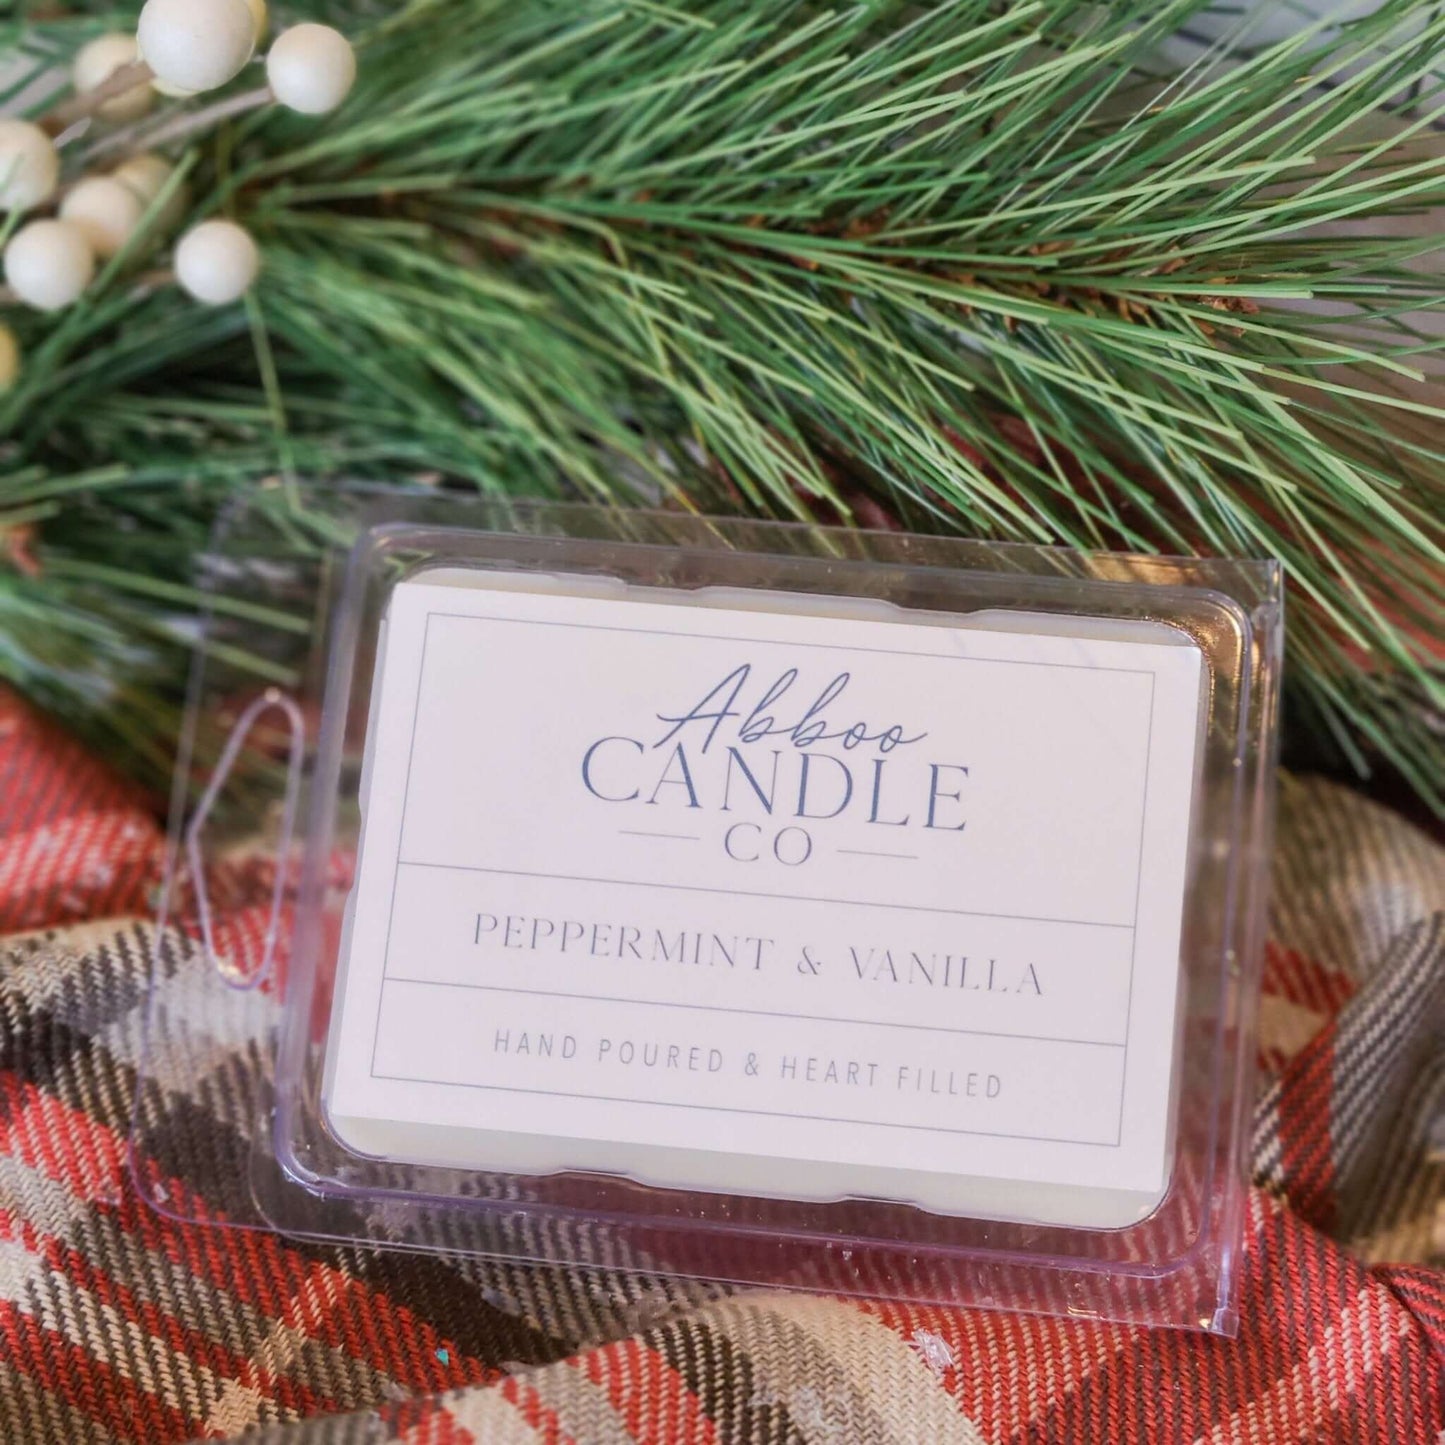 Peppermint and Vanilla Soy Wax Melts - Abboo Candle Co